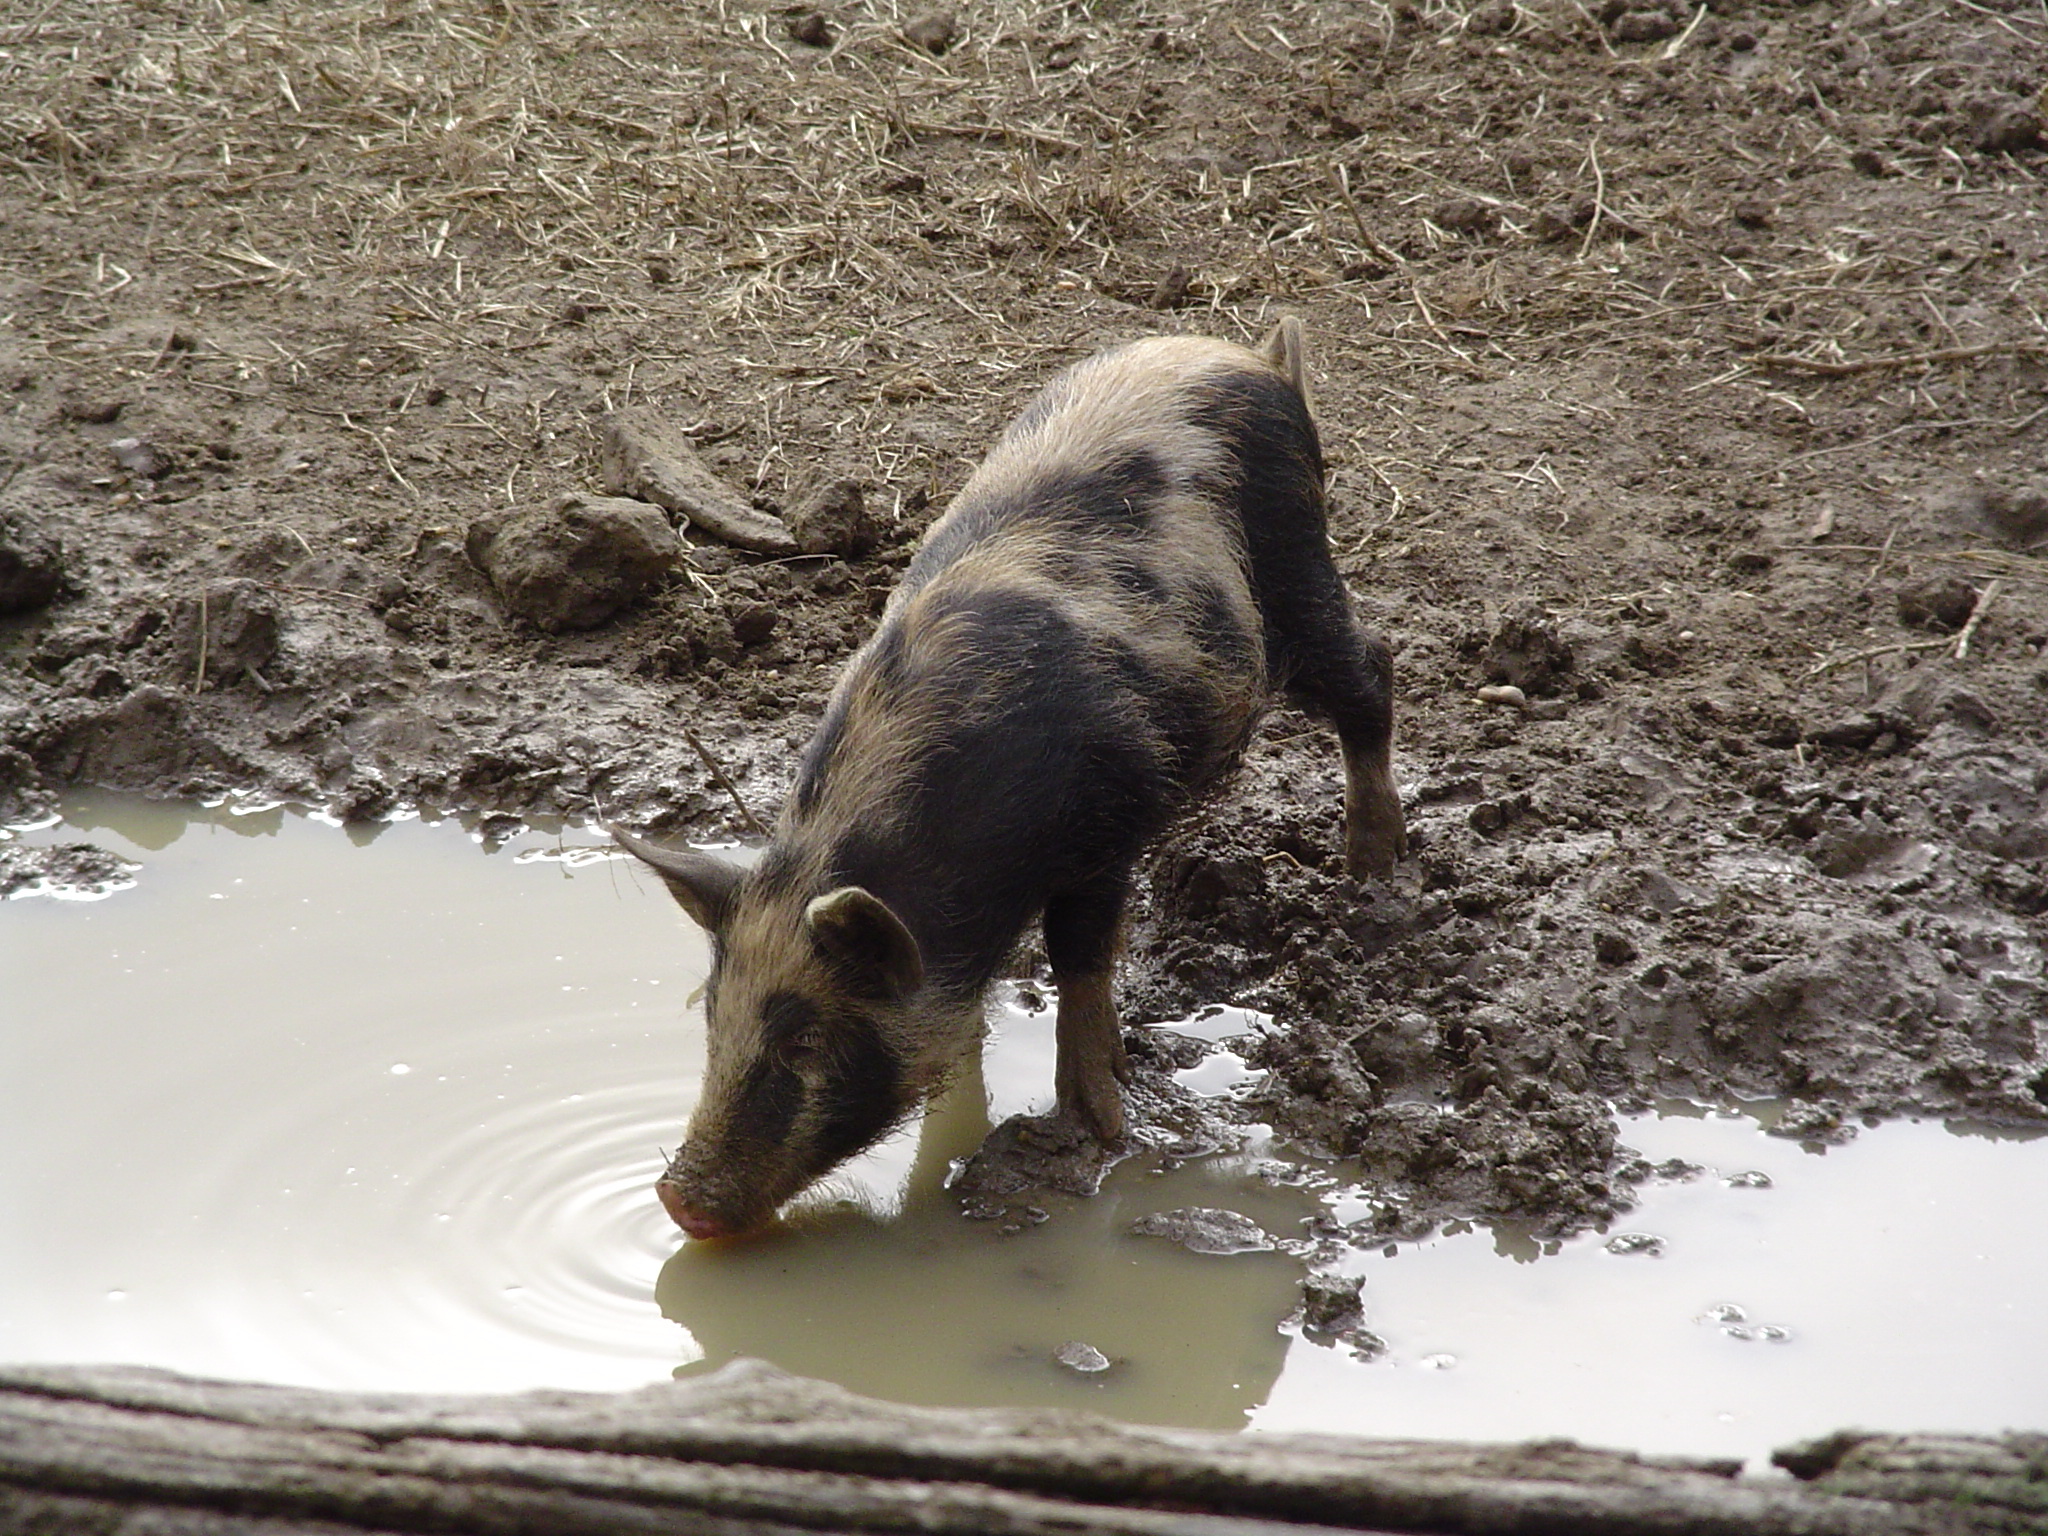 Small ossabaw hog, tan from mud with black spots, drinking water